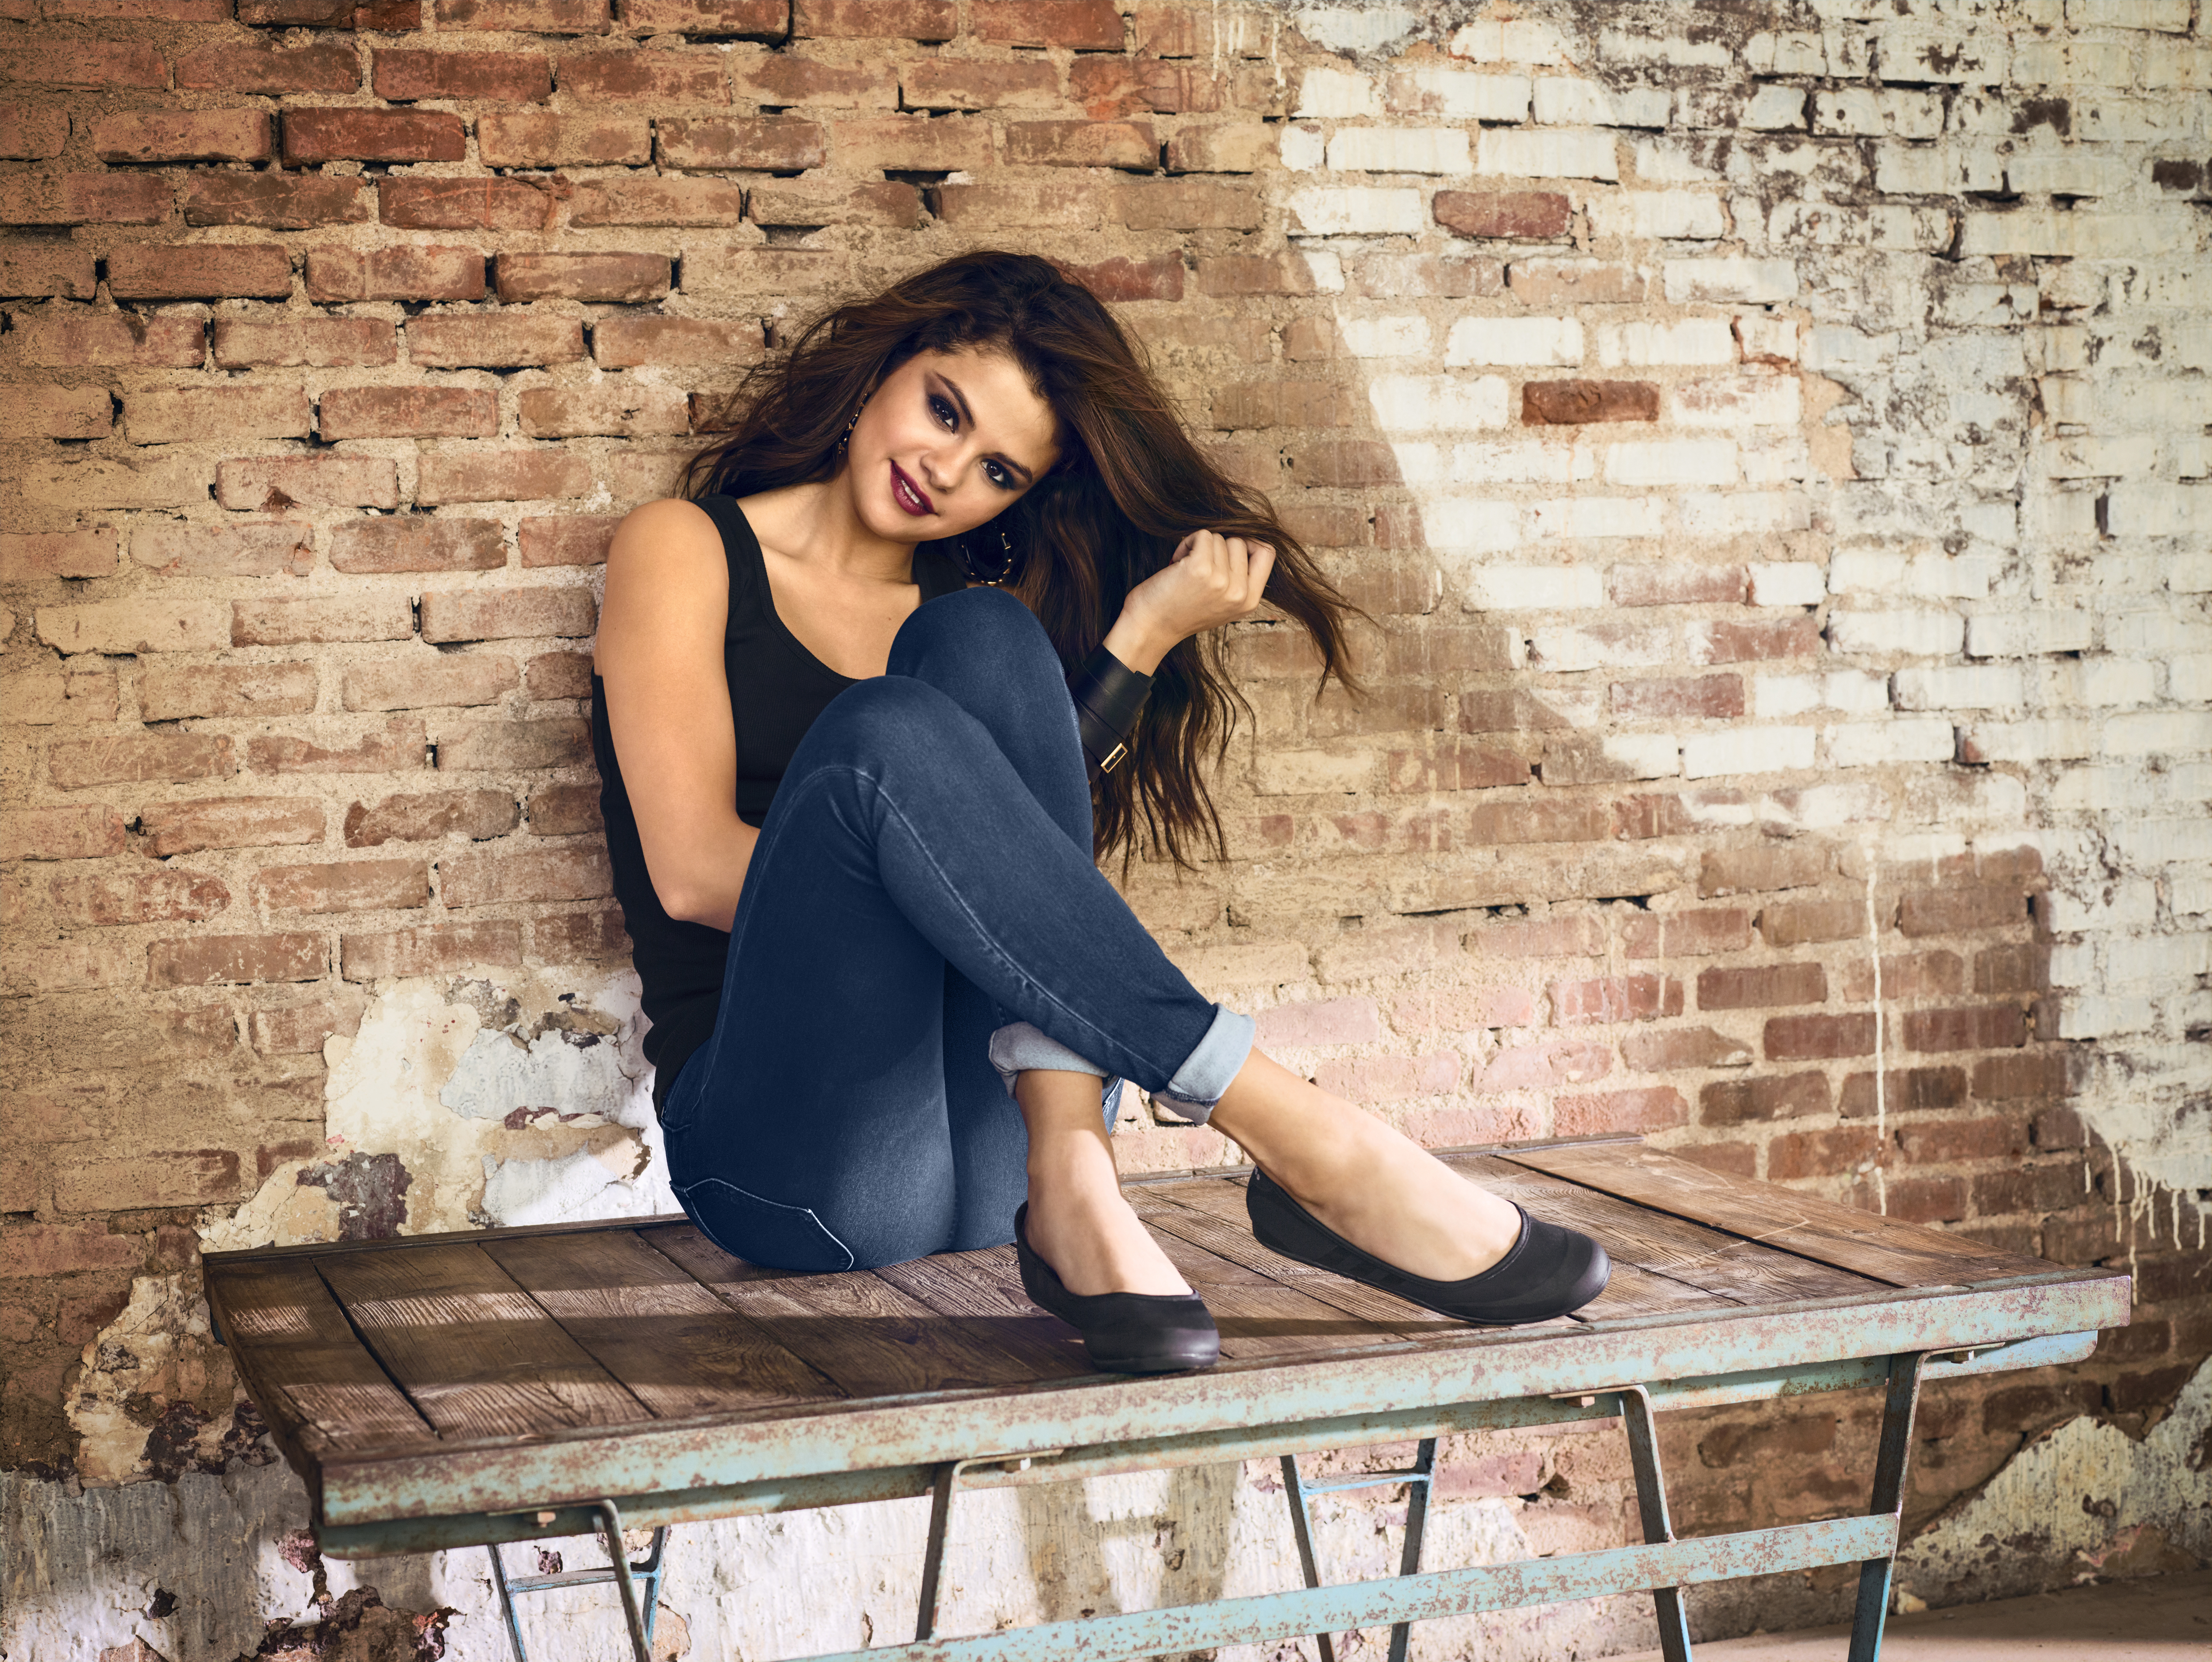 1920x1080 Selena Adidas Neo 5k Photoshoot Laptop Full HD 1080P HD 4k Wallpapers, Images, Backgrounds, Pictures